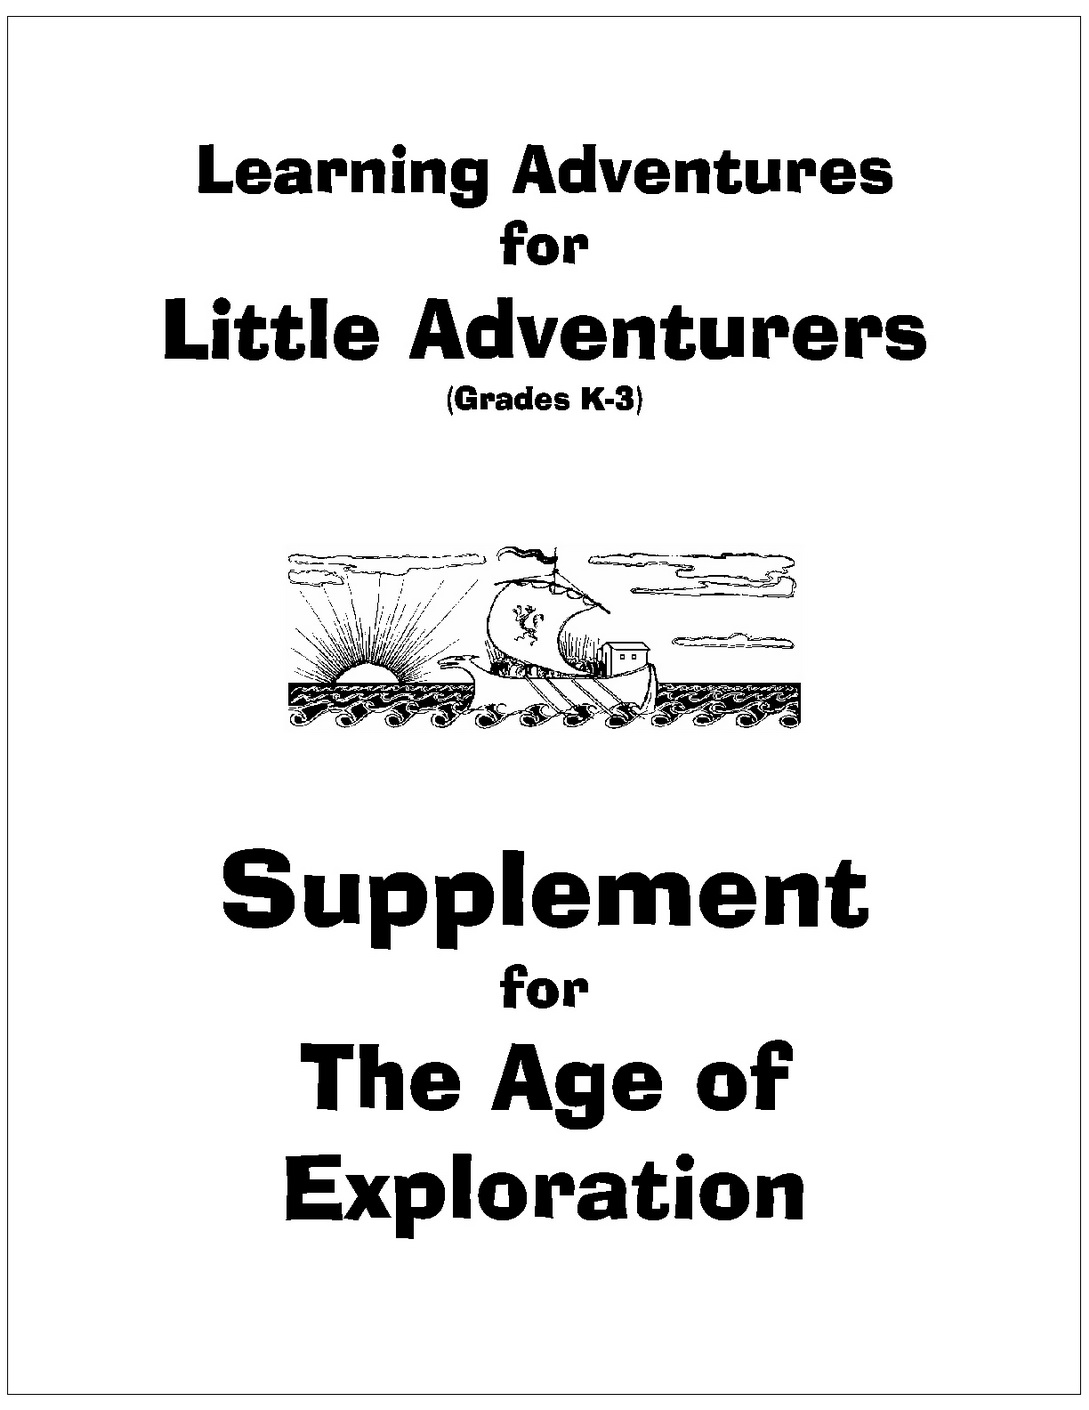 Cover page - Little Adventures - Age of Exploration_2